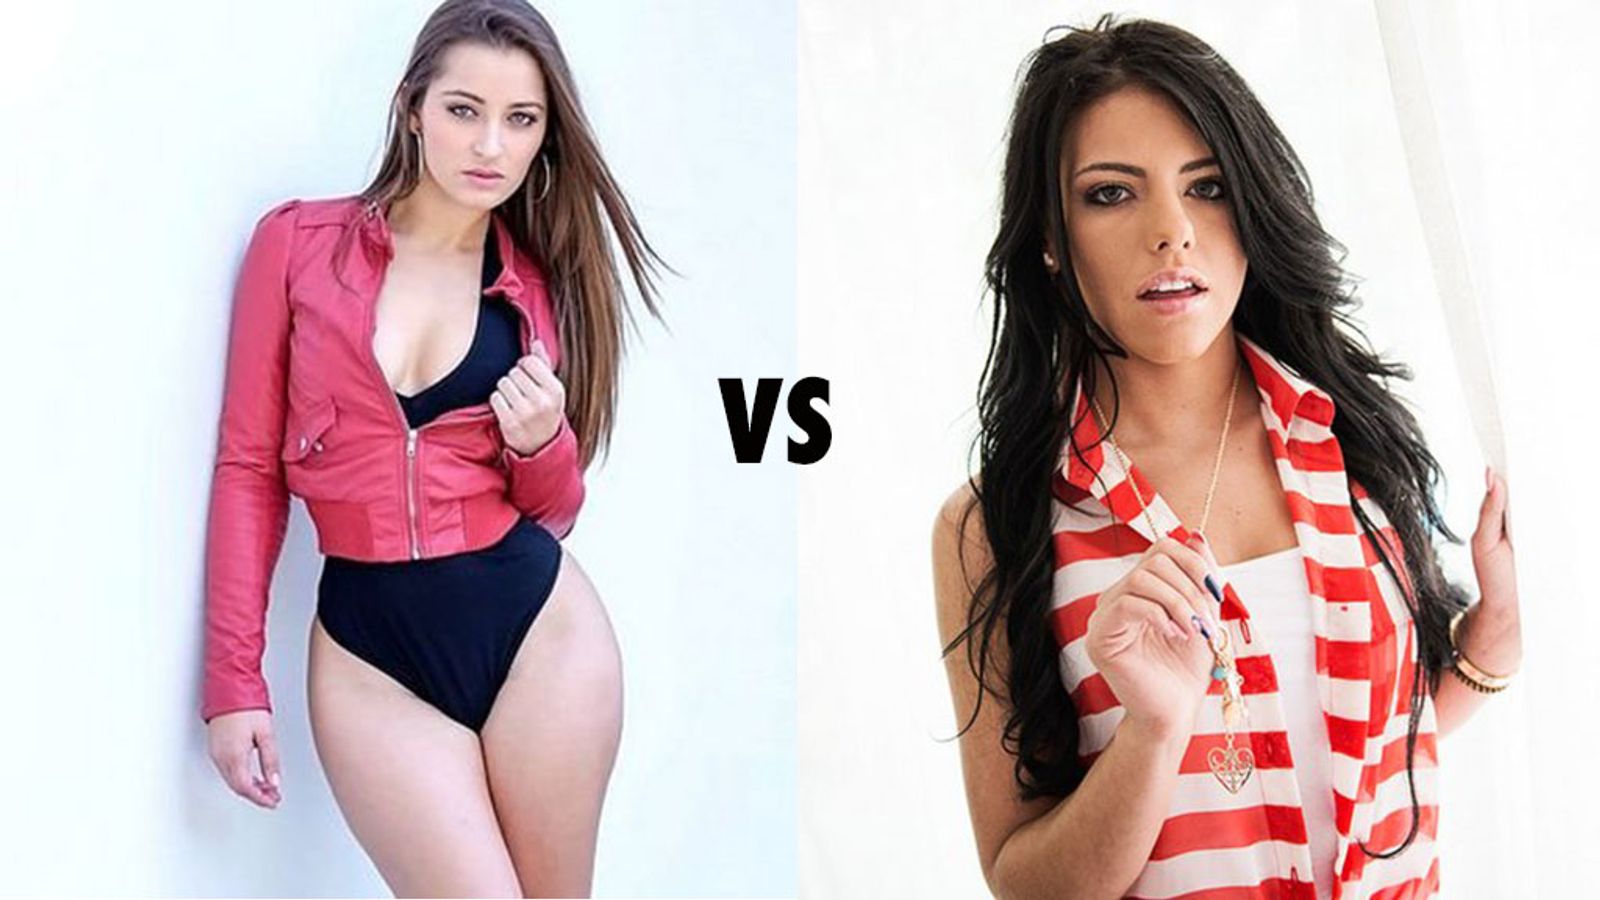 It's Down To Dani Daniels & Adriana Chechik in GameLink’s Porn Star Madness